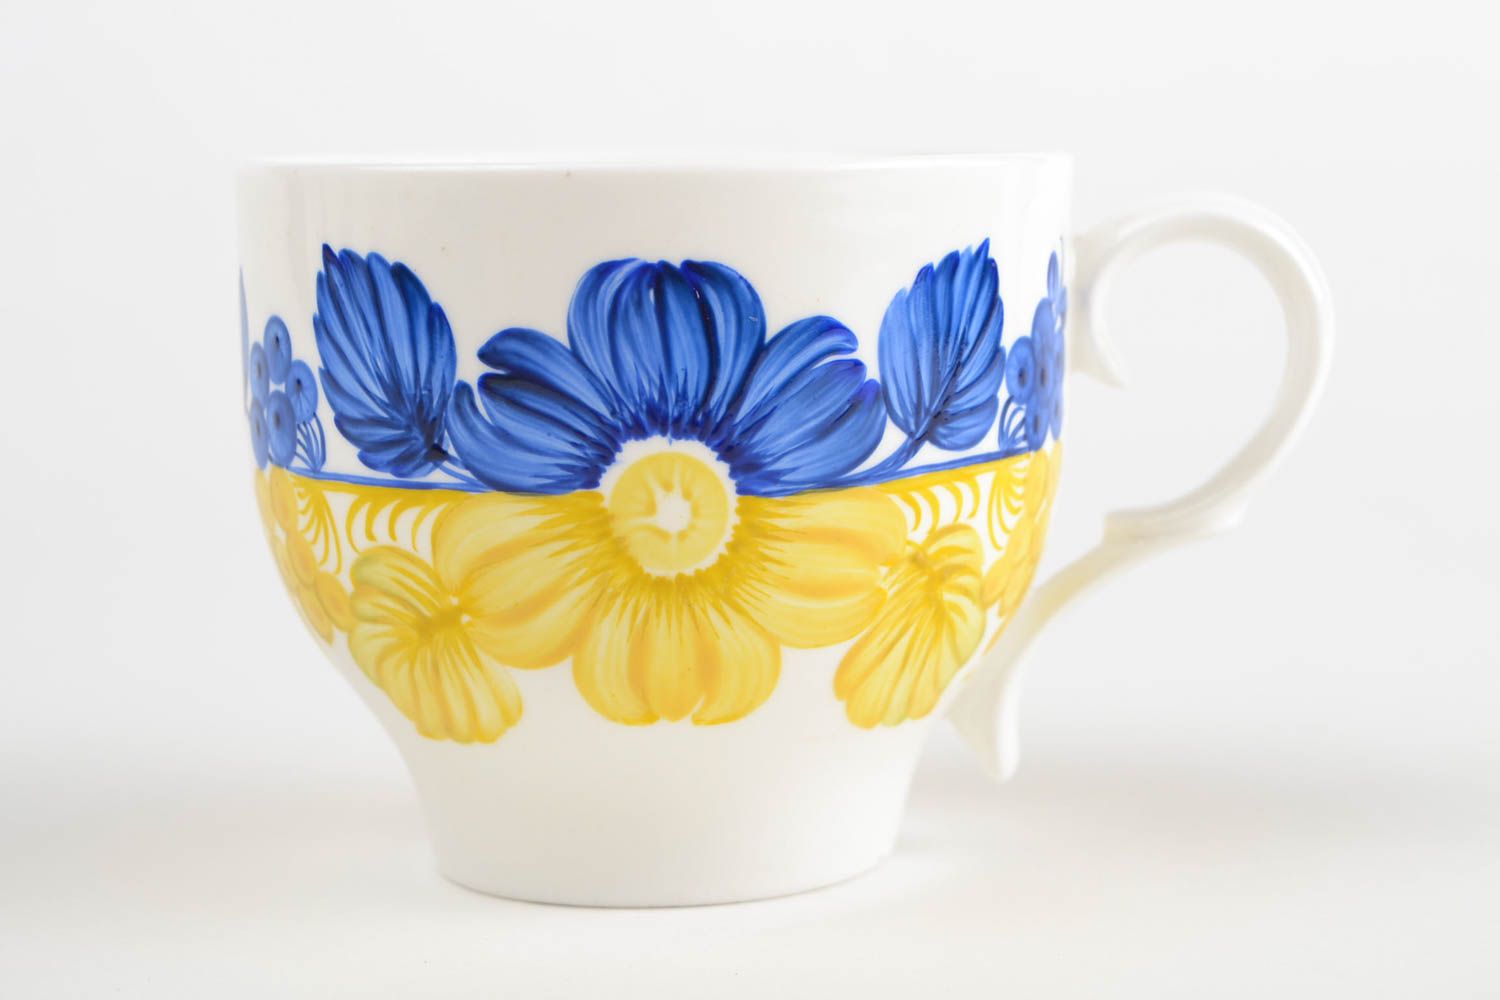 painting on porcelain cups